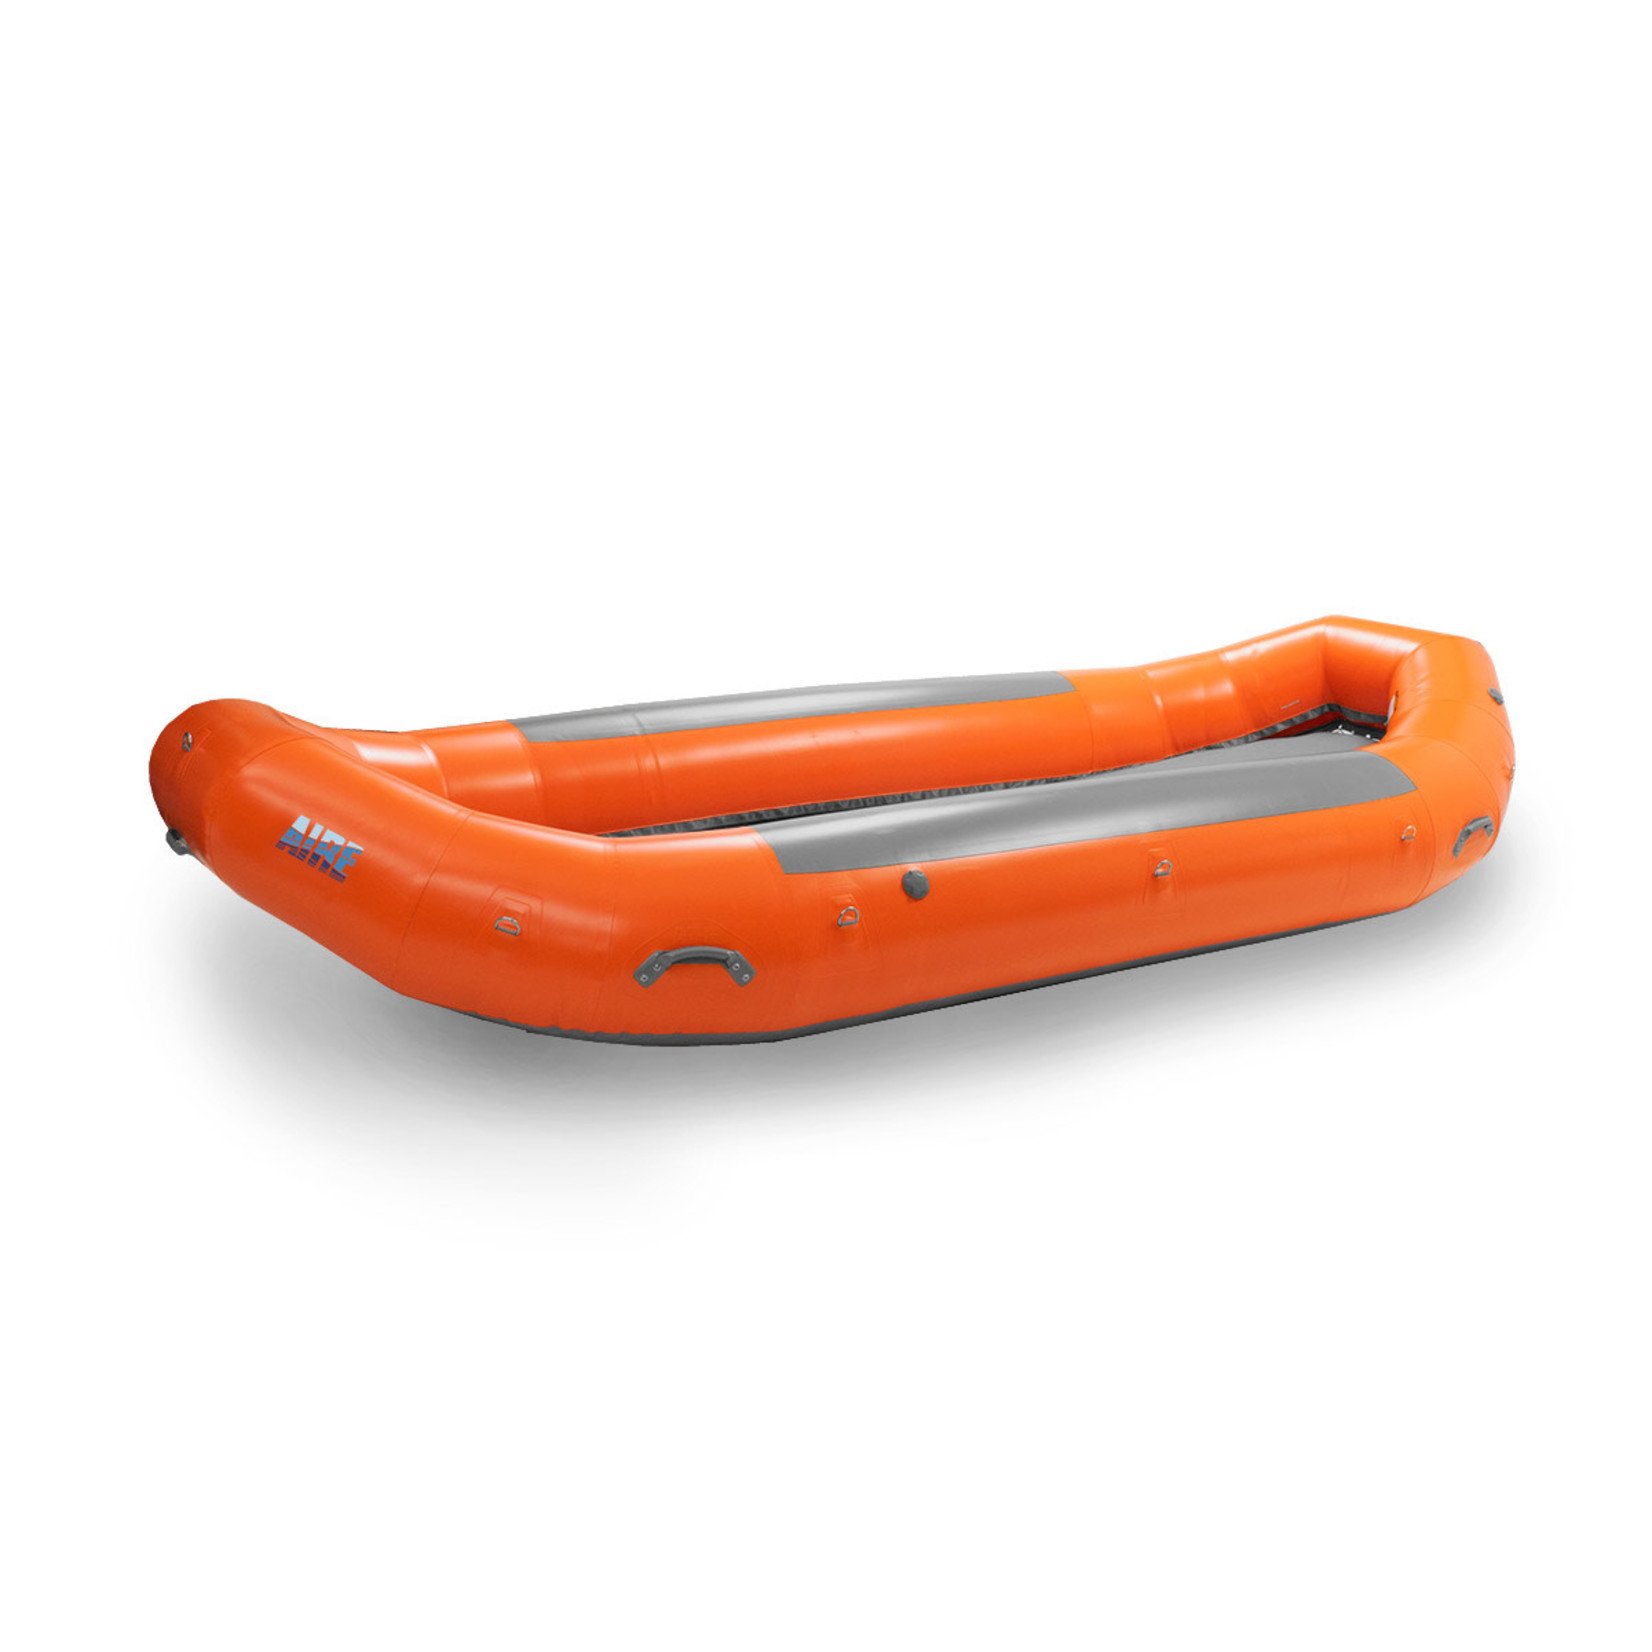 AIRE AIRE 146DD  Self-Bailing Raft